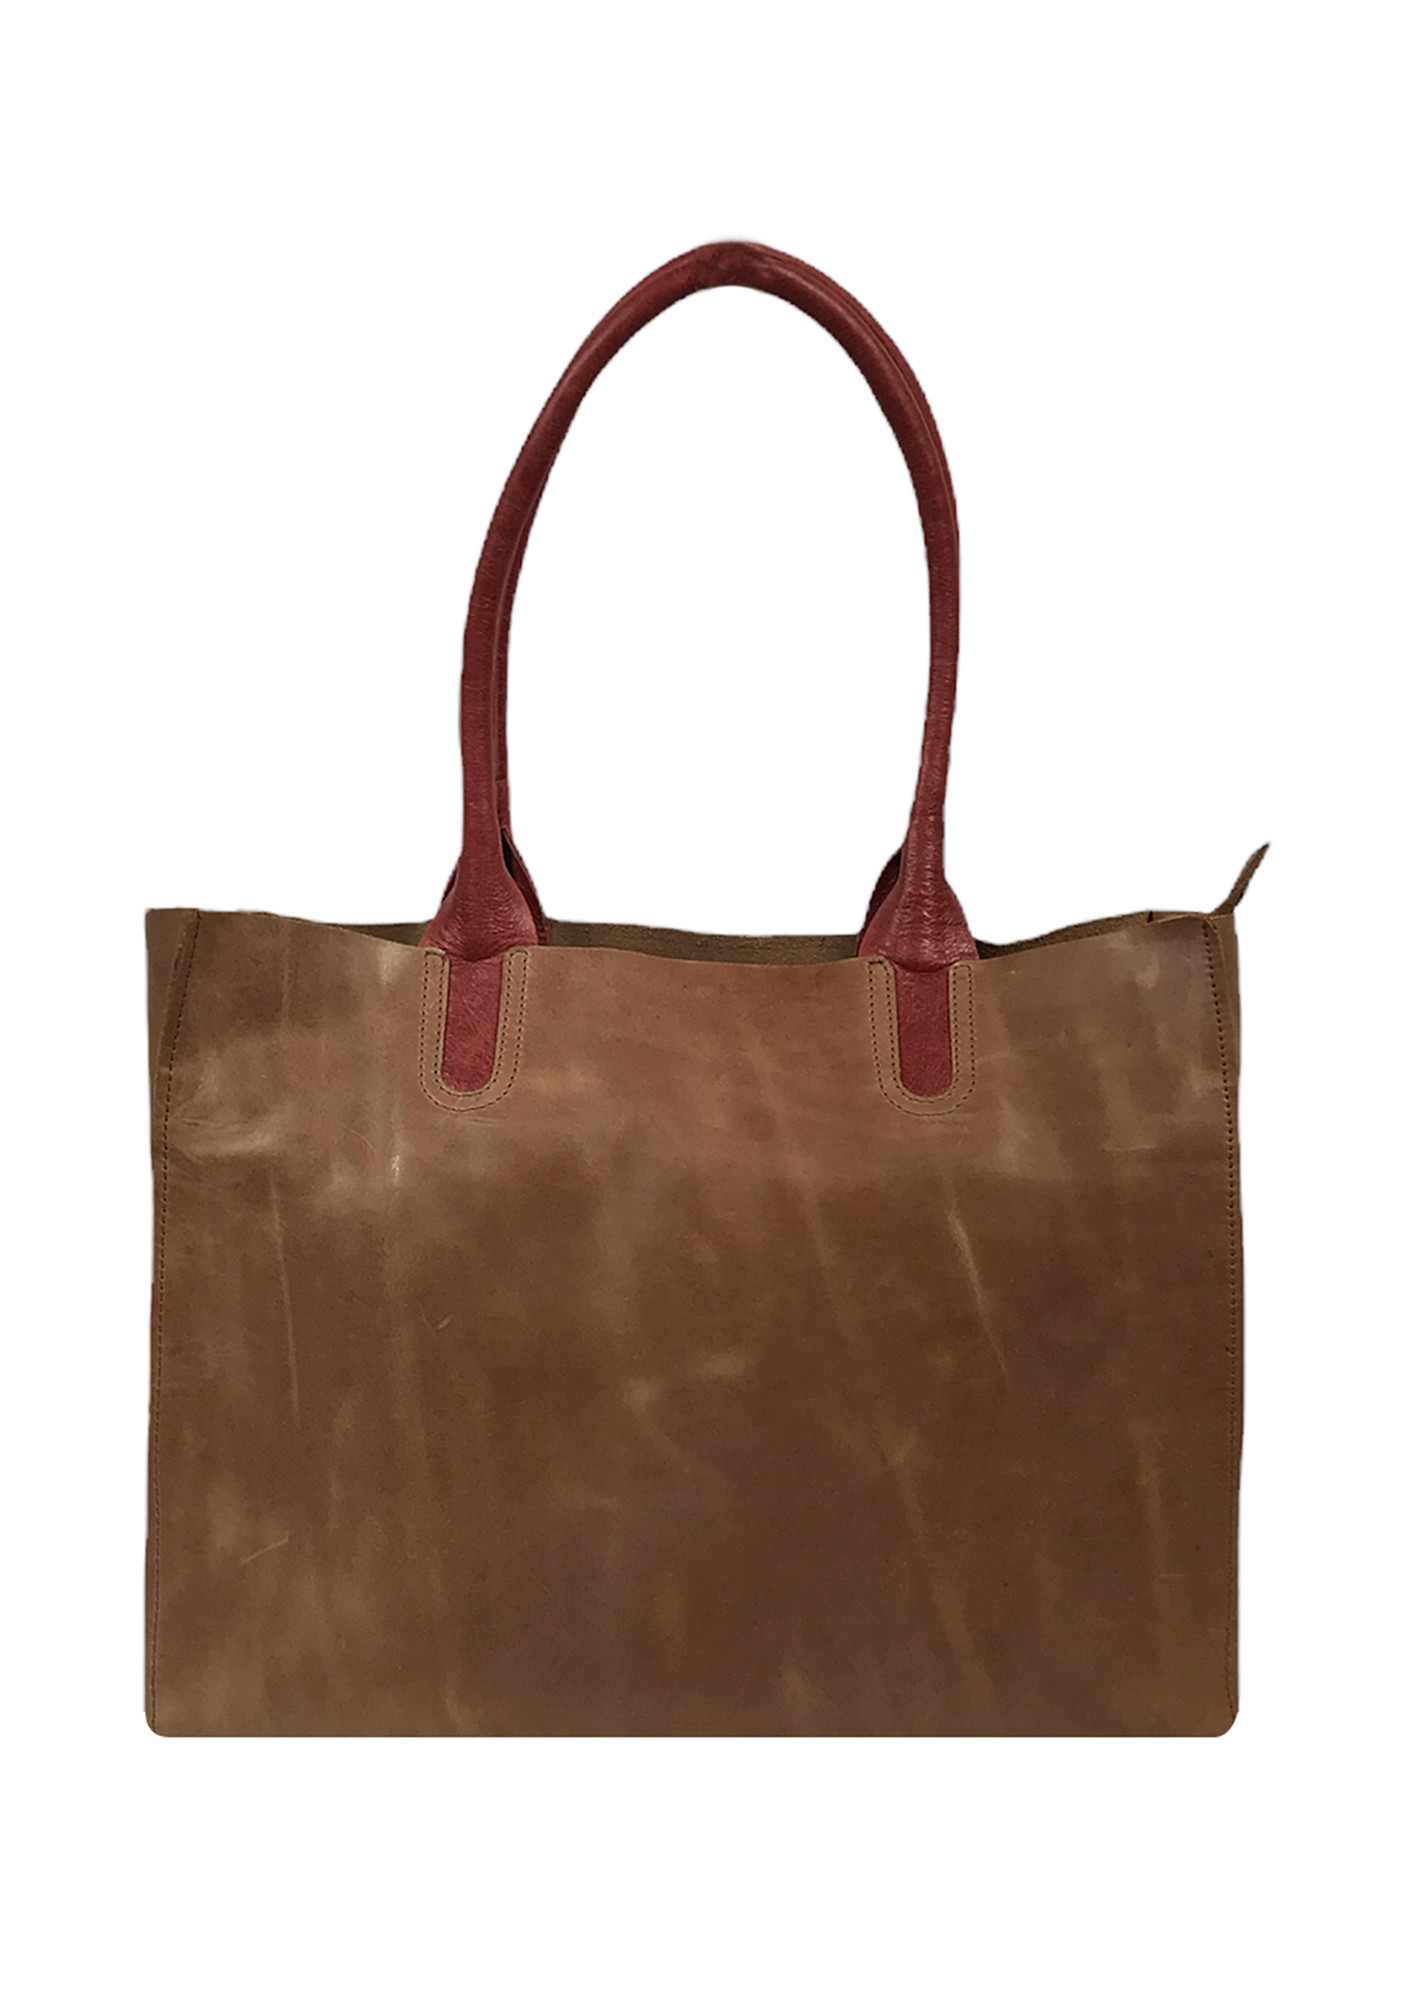 Brown Tote Bag With Leather Shoulder Straps